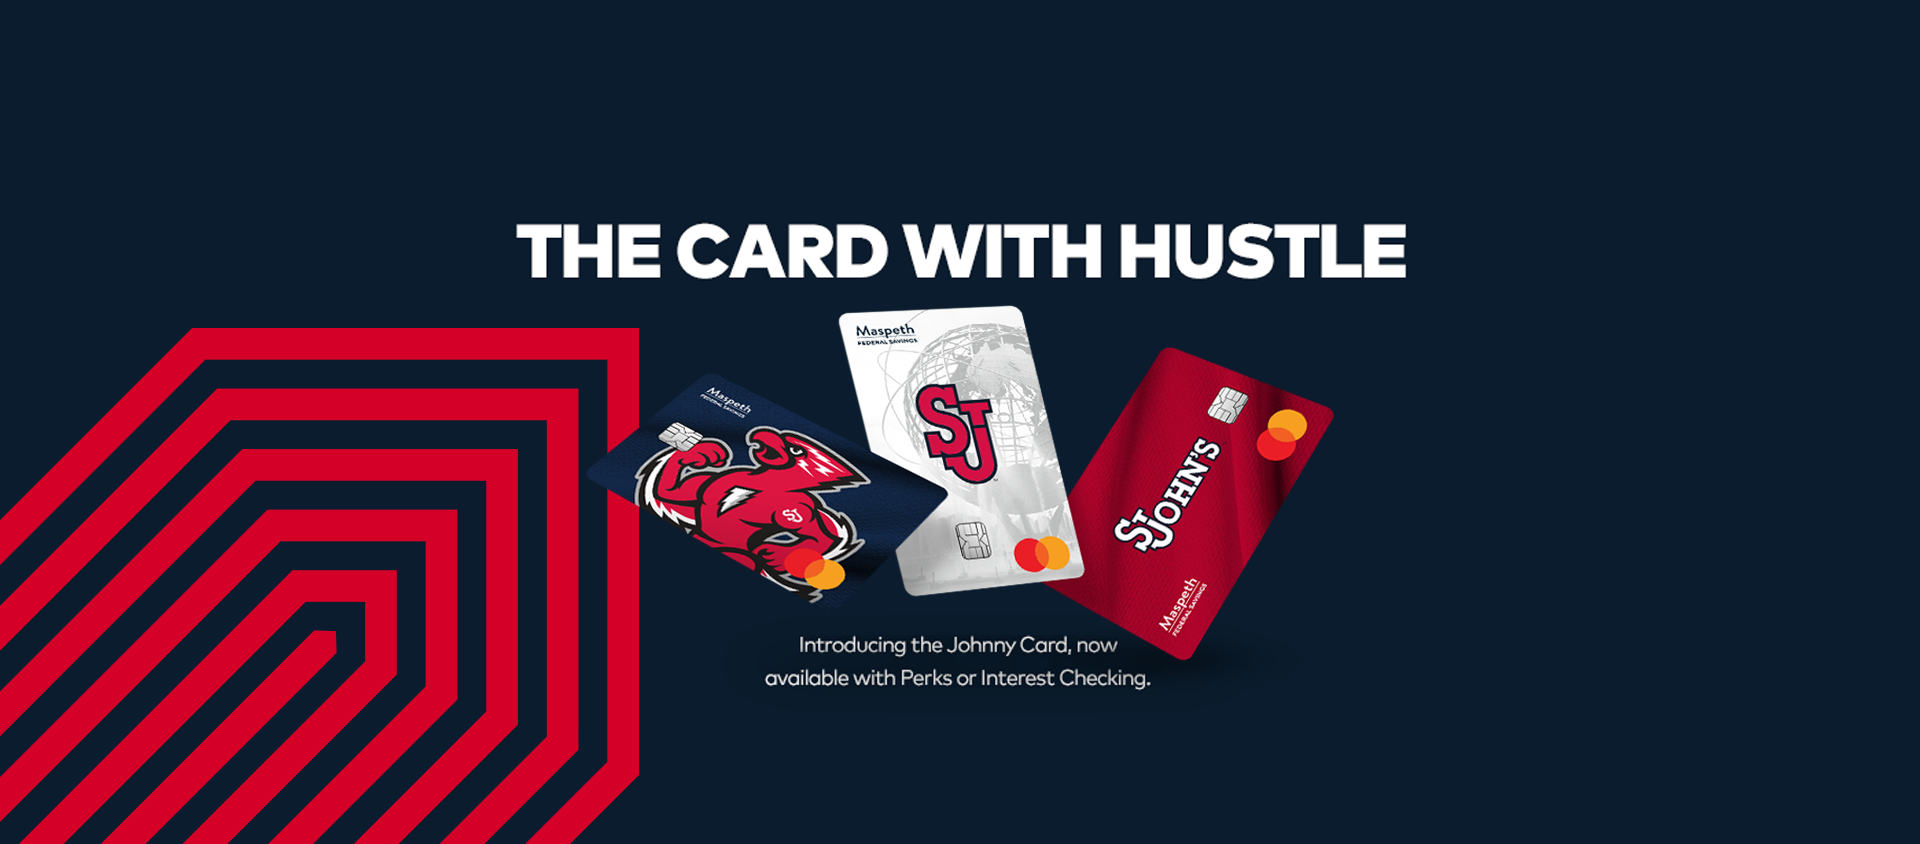 The card with hustle. Introducing the Johnny Card, now available with Perks or Interest Checking